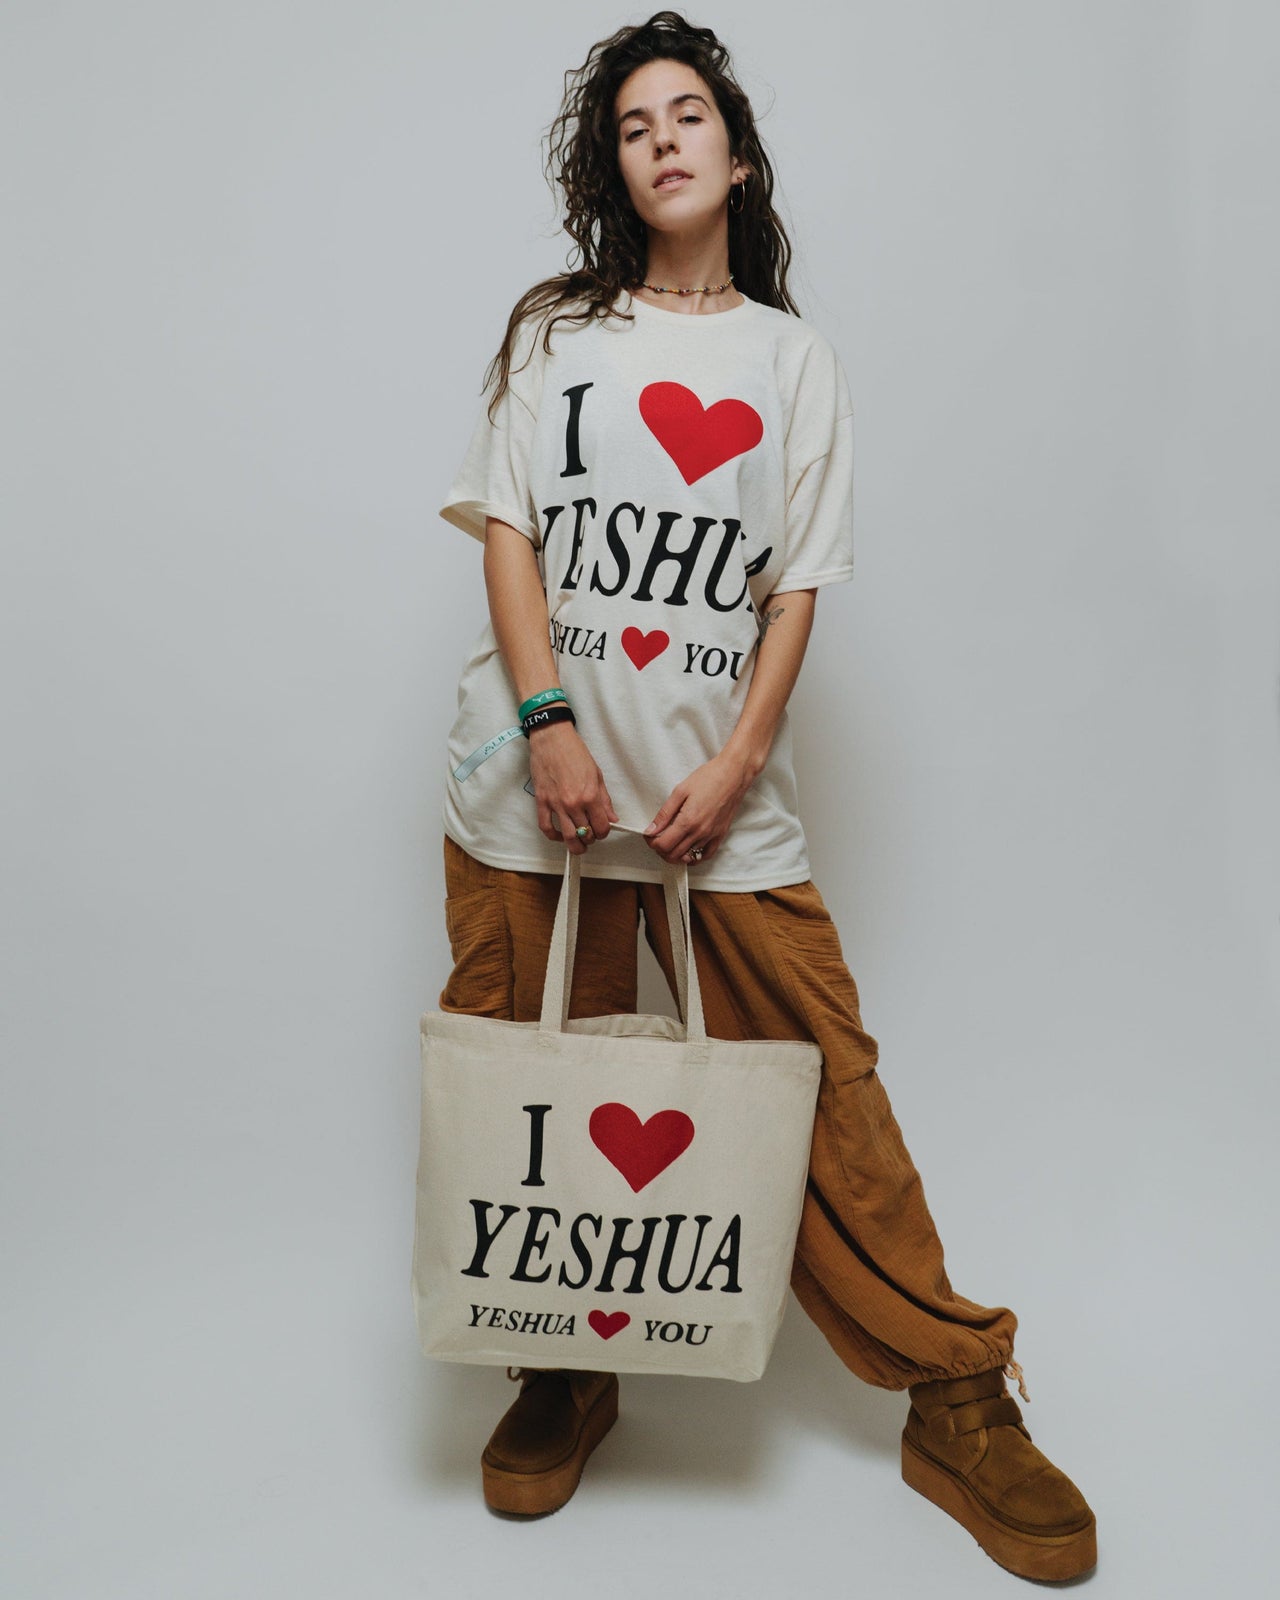 I Love Yeshua, Yeshua loves you tote bagfrom the WWYD (What Would Yeshua Do) collection. Christian shirts from NHIM Apparel. All glory to Yeshua! NHIM Apparel christian clothing brand